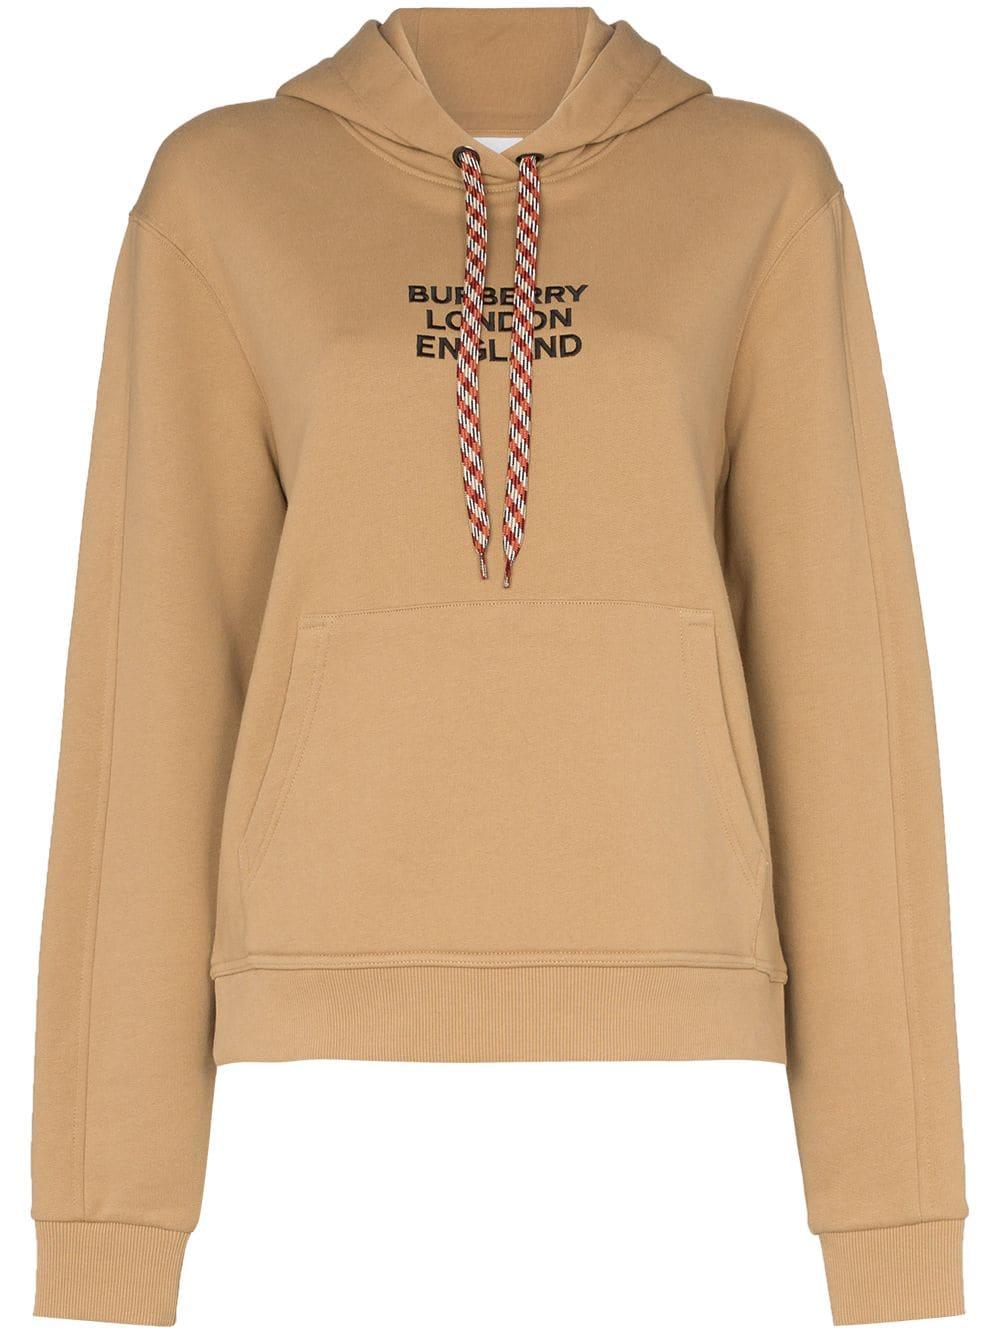 Burberry Embroidered Logo Oversized Hoodie in Brown - Lyst